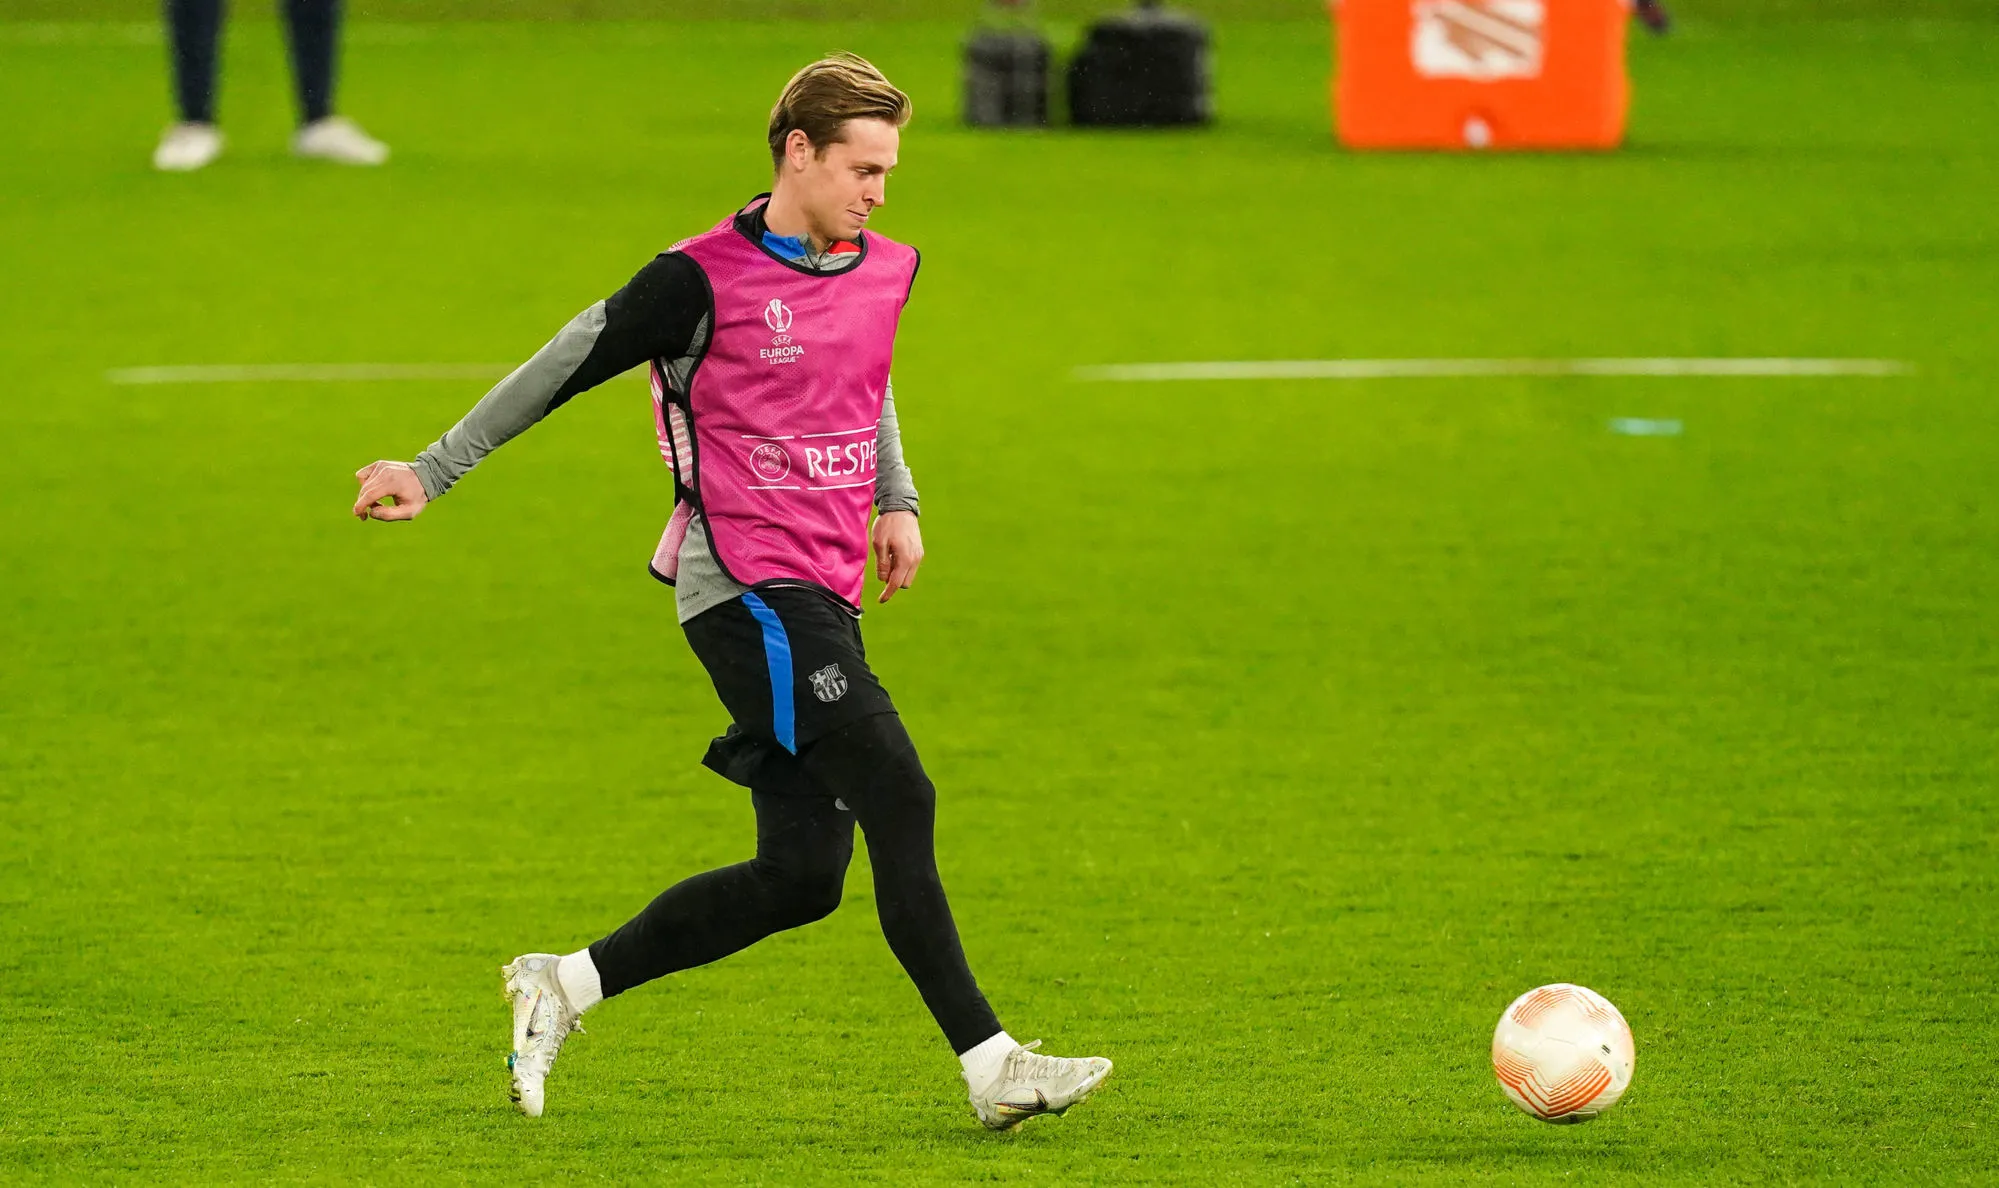 Barcelona's Frenkie de Jong during a training session at Old Trafford, Manchester. Picture date: Wednesday February 22, 2023. - Photo by Icon sport